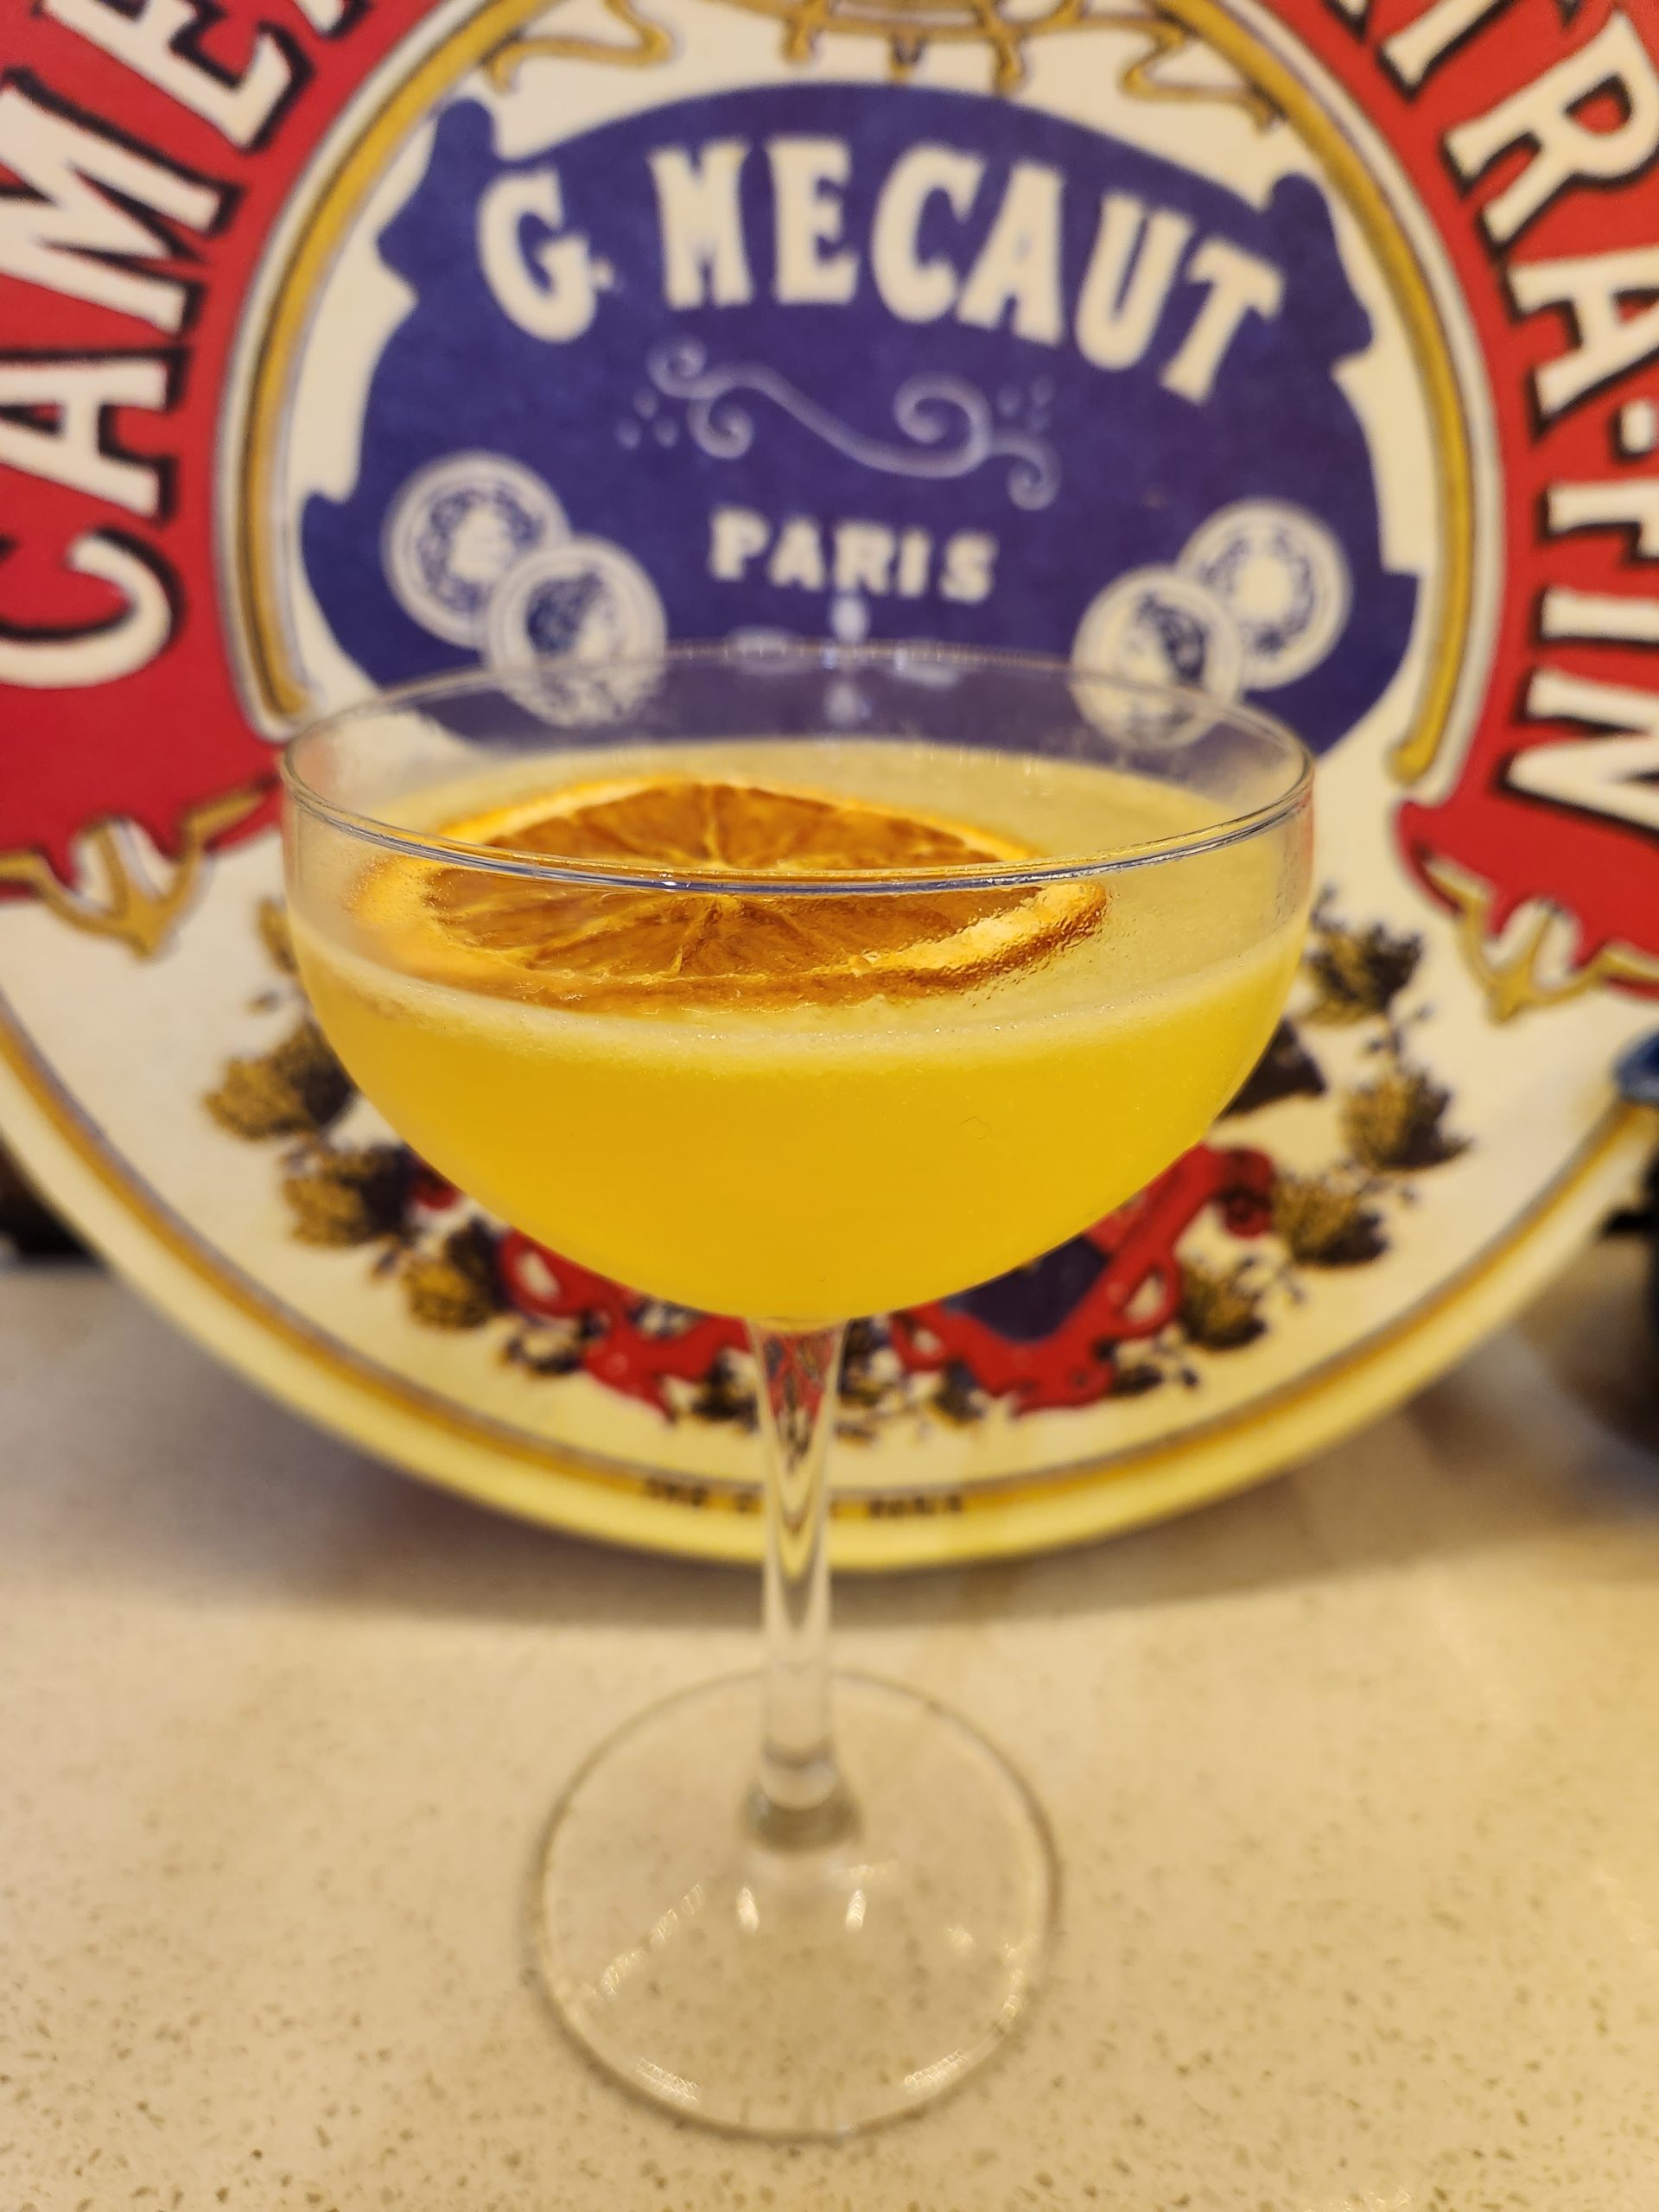 A Bees Knees cocktail in a coupe glass.